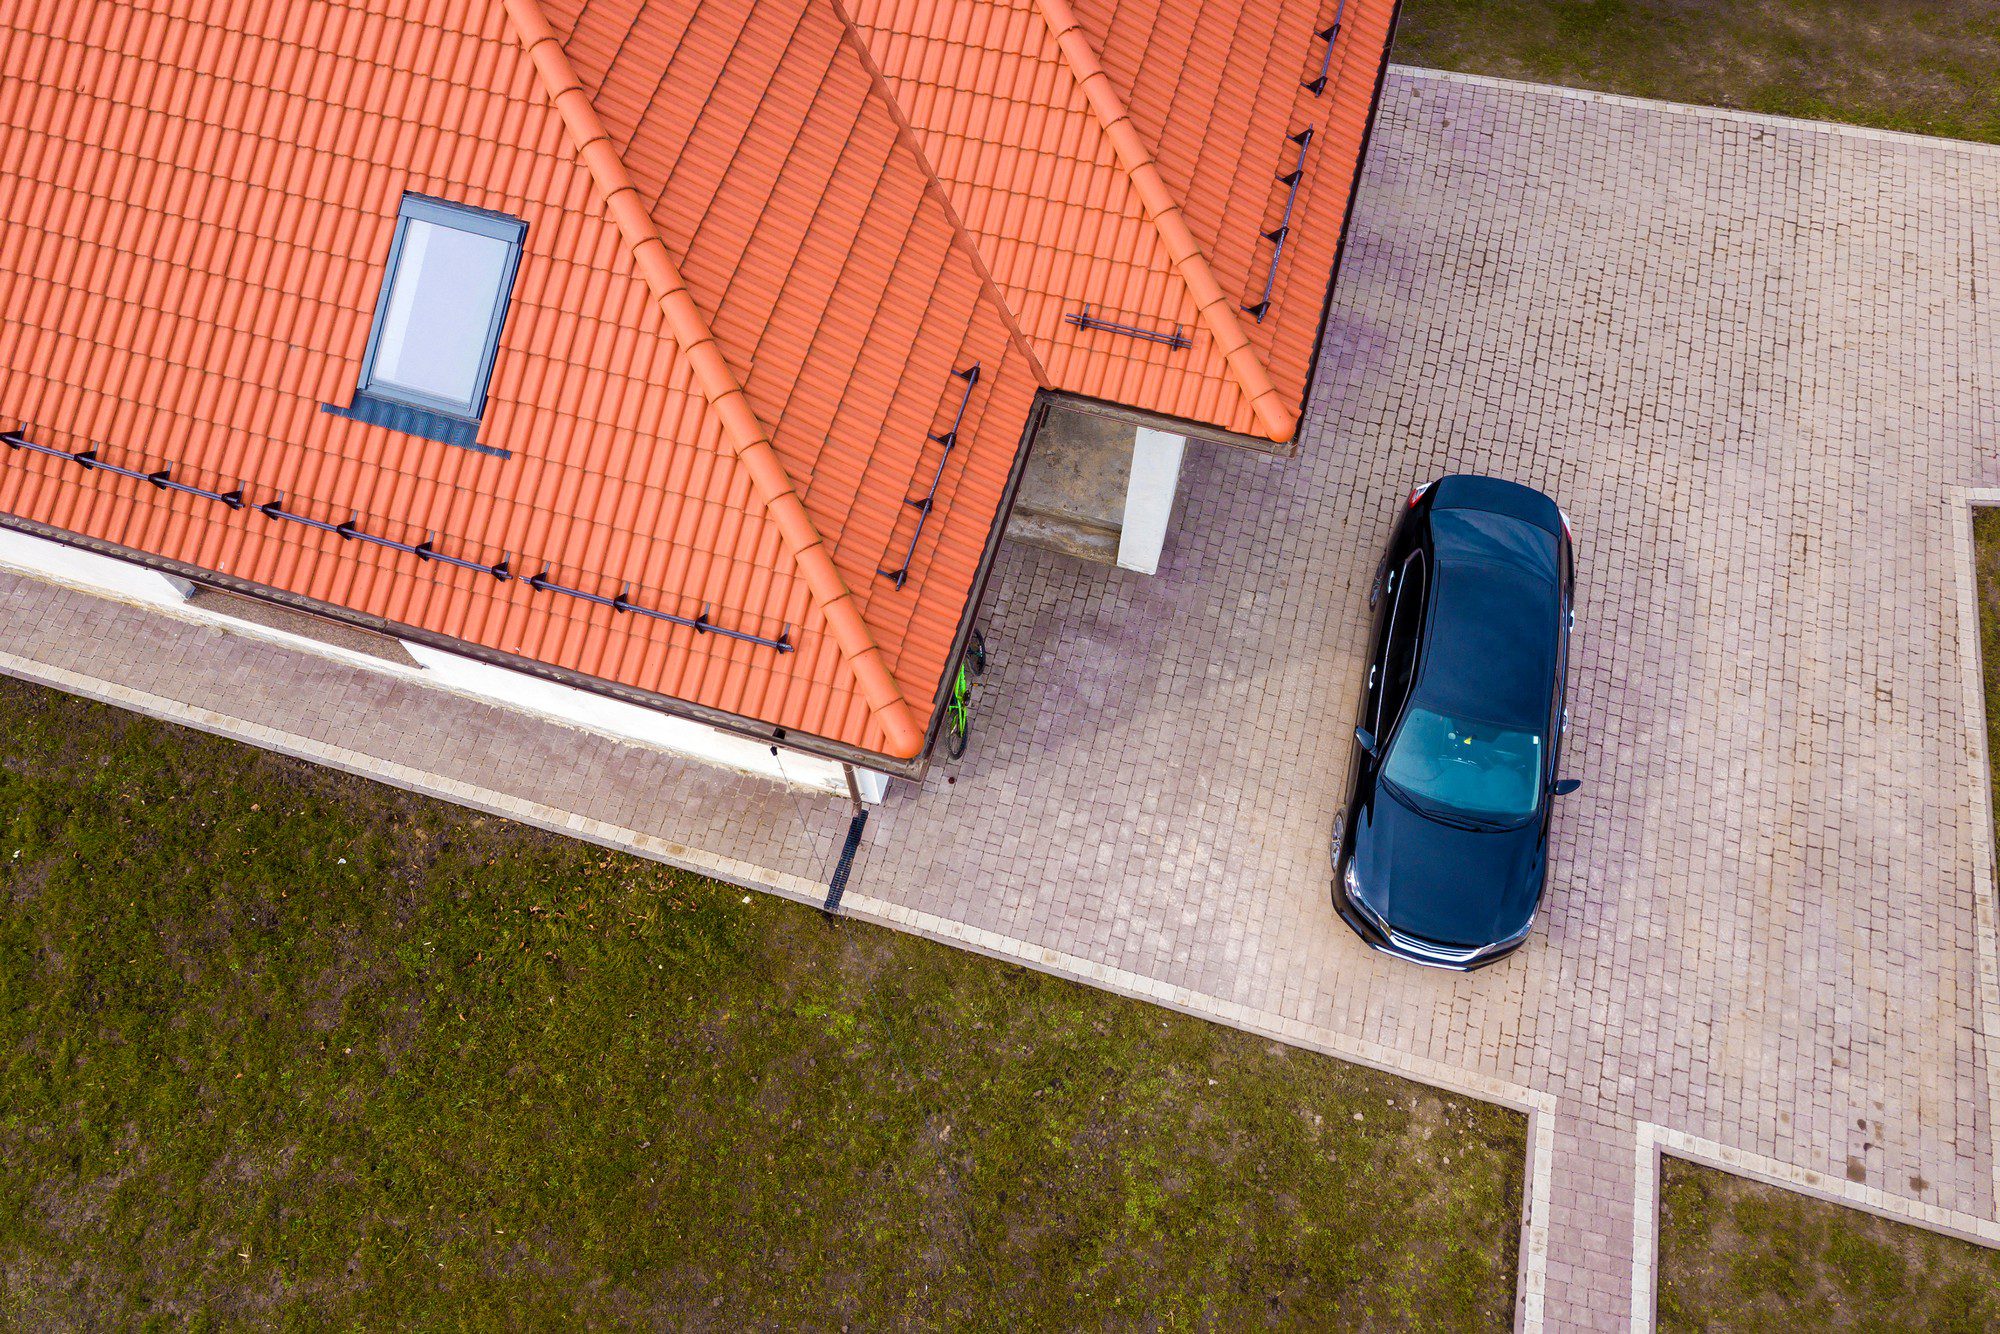 This image shows an aerial view of a residential setting. It features a house with a red-tiled roof and a driveway made of paving stones. There is a black car parked on the driveway. To the left of the driveway, there's a patch of grass and along the edge of the house, a thin strip of garden or grass can be seen. The perspective is from above, and it provides a clear view of the geometric shapes and patterns created by the arrangement of the buildings and driveways.